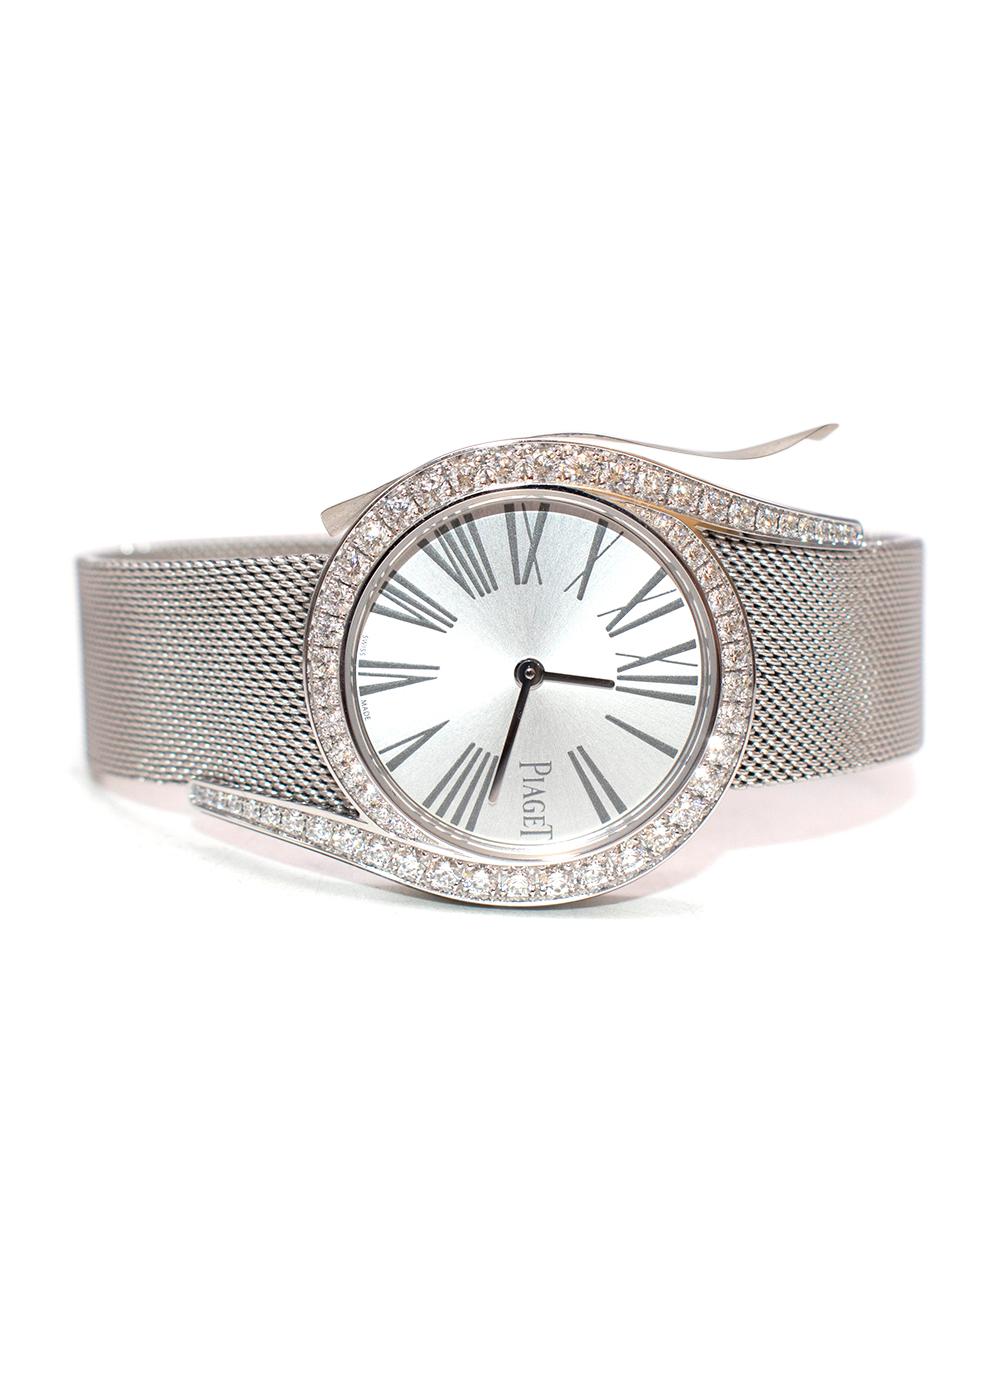 Piaget 18kt White Gold & Diamond 32mm Limelight Gala Watch

- A beautiful bracelet watch crafted in 18kt white gold
- Case set with 62 brilliant-cut diamonds (approx. 1.75 ct)
- traditional white gold Milanese bracelet
- Buckle set with a